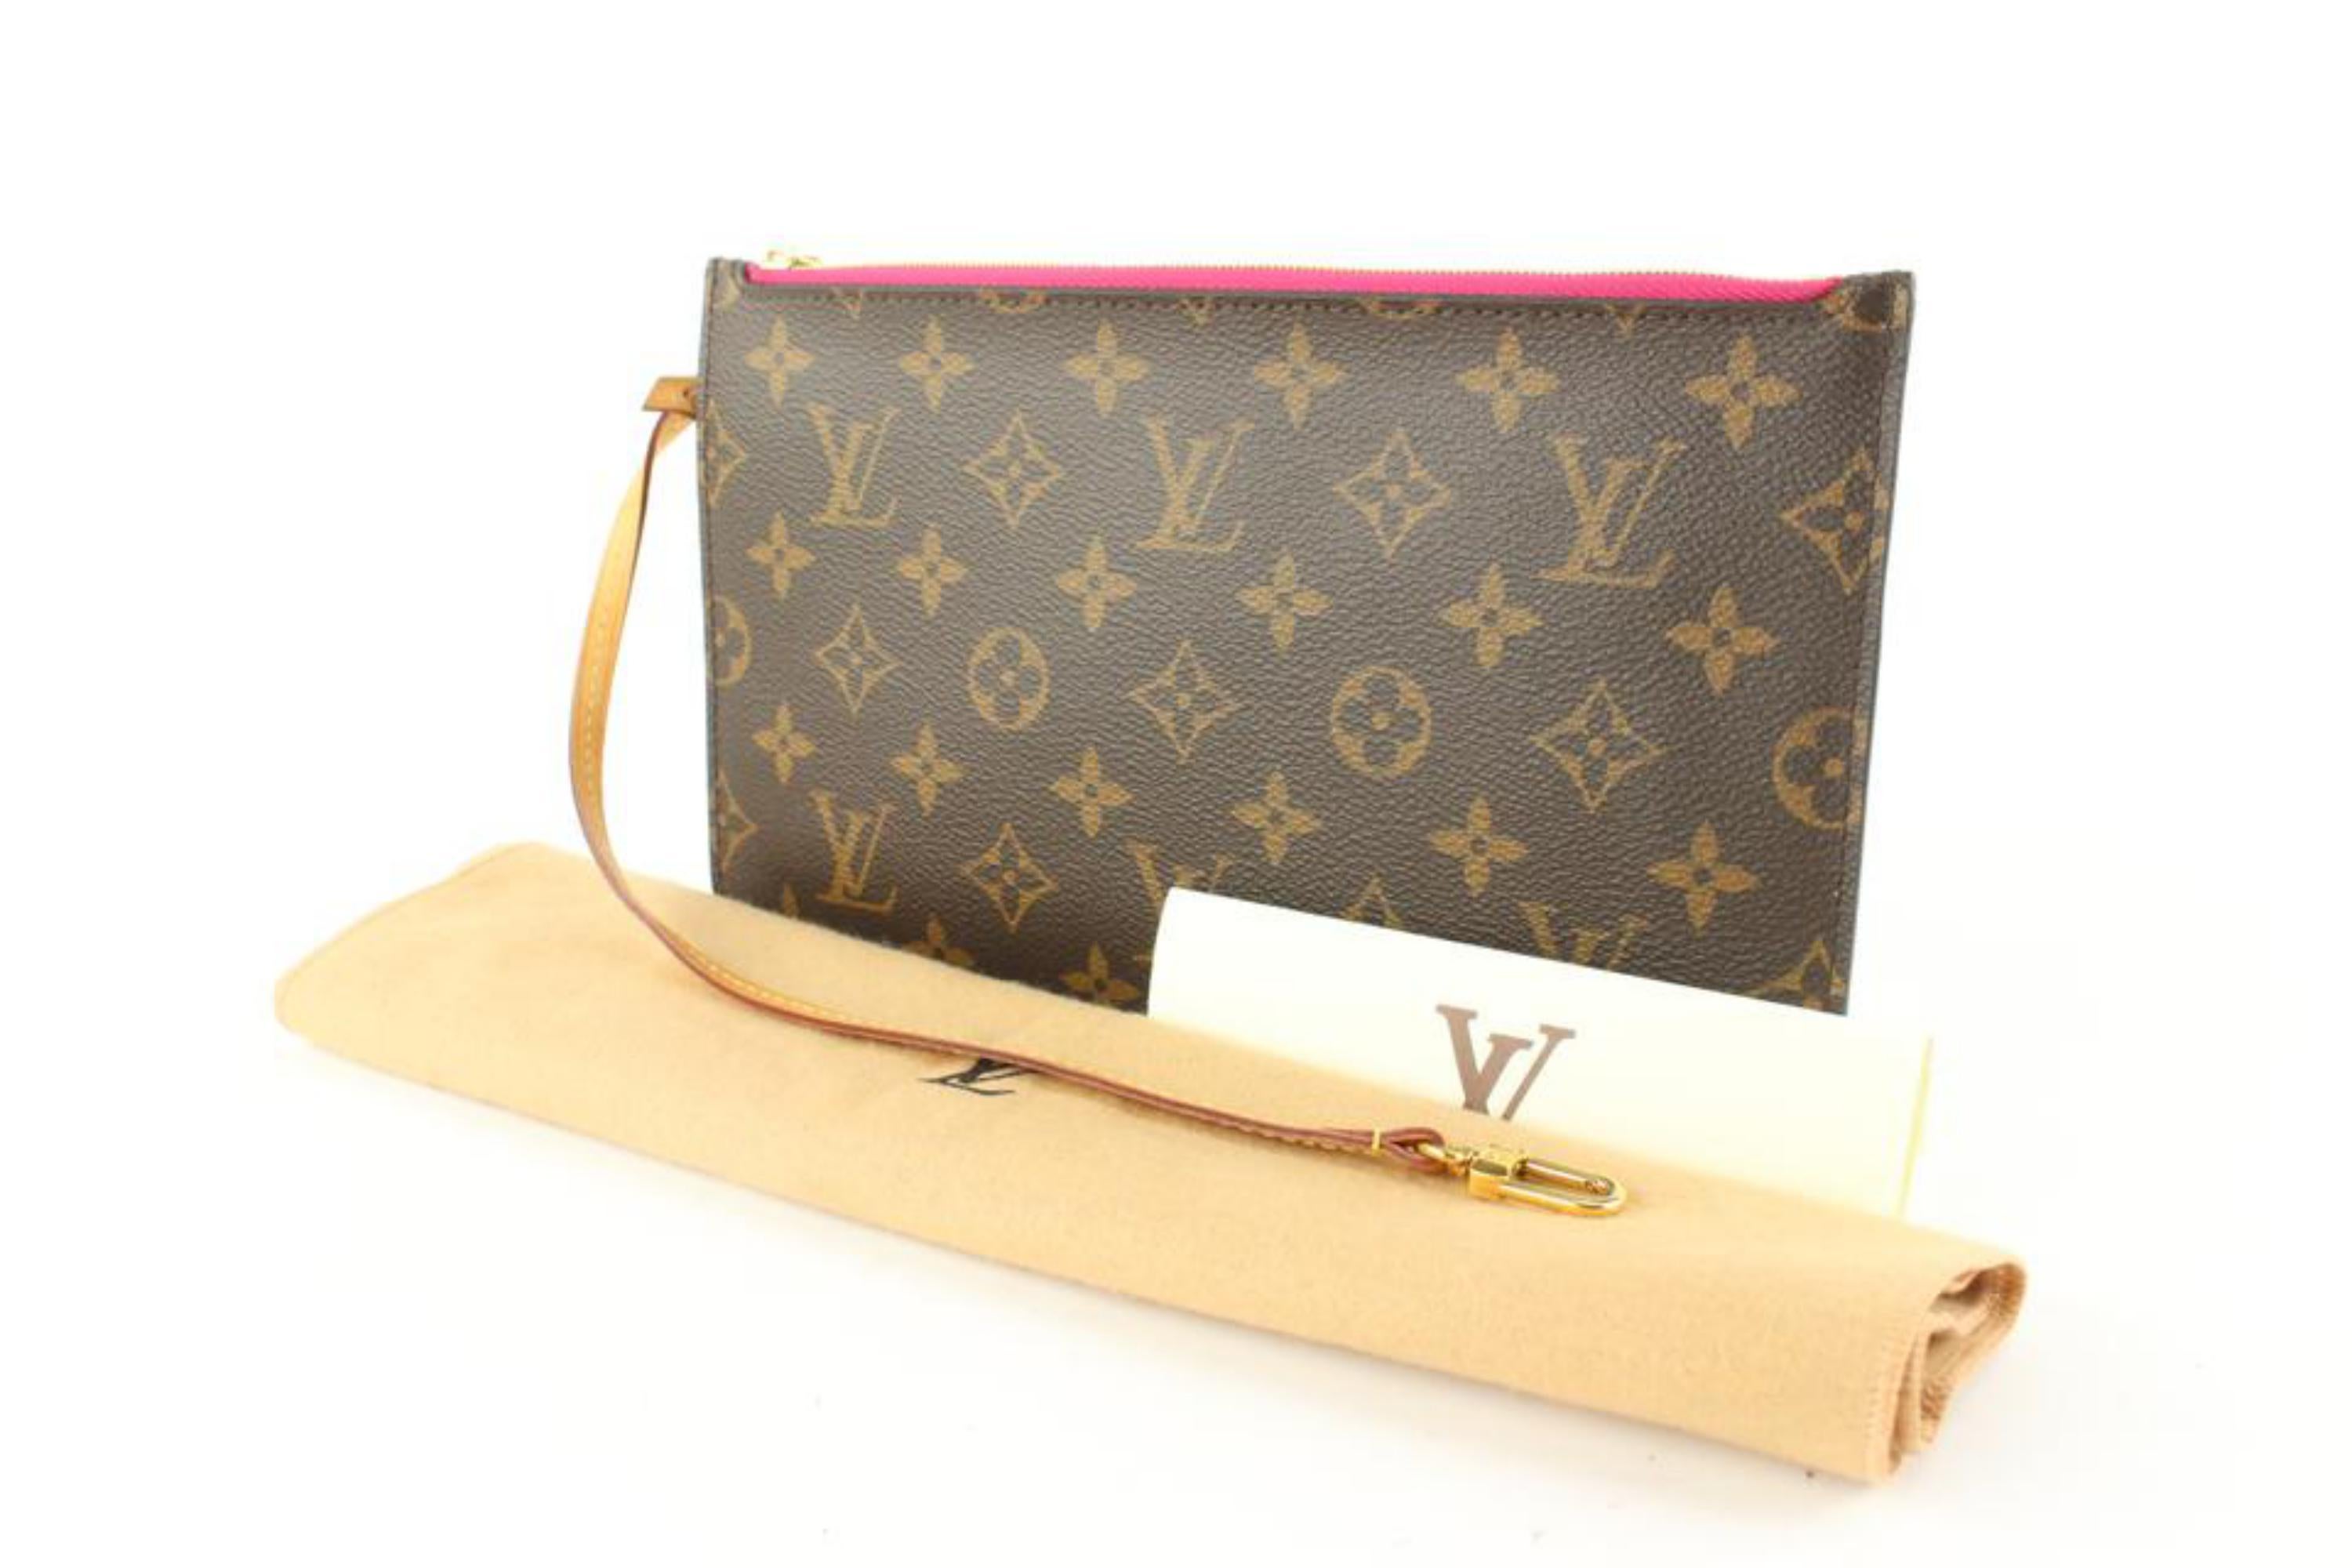 Louis Vuitton Monogram x Fuchsia Neverfull Pochette MM or GM Wristlet Pouch 1222lv40
Date Code/Serial Number: SD4116
Made In: U.S.A
Measurements: Length:  9.6